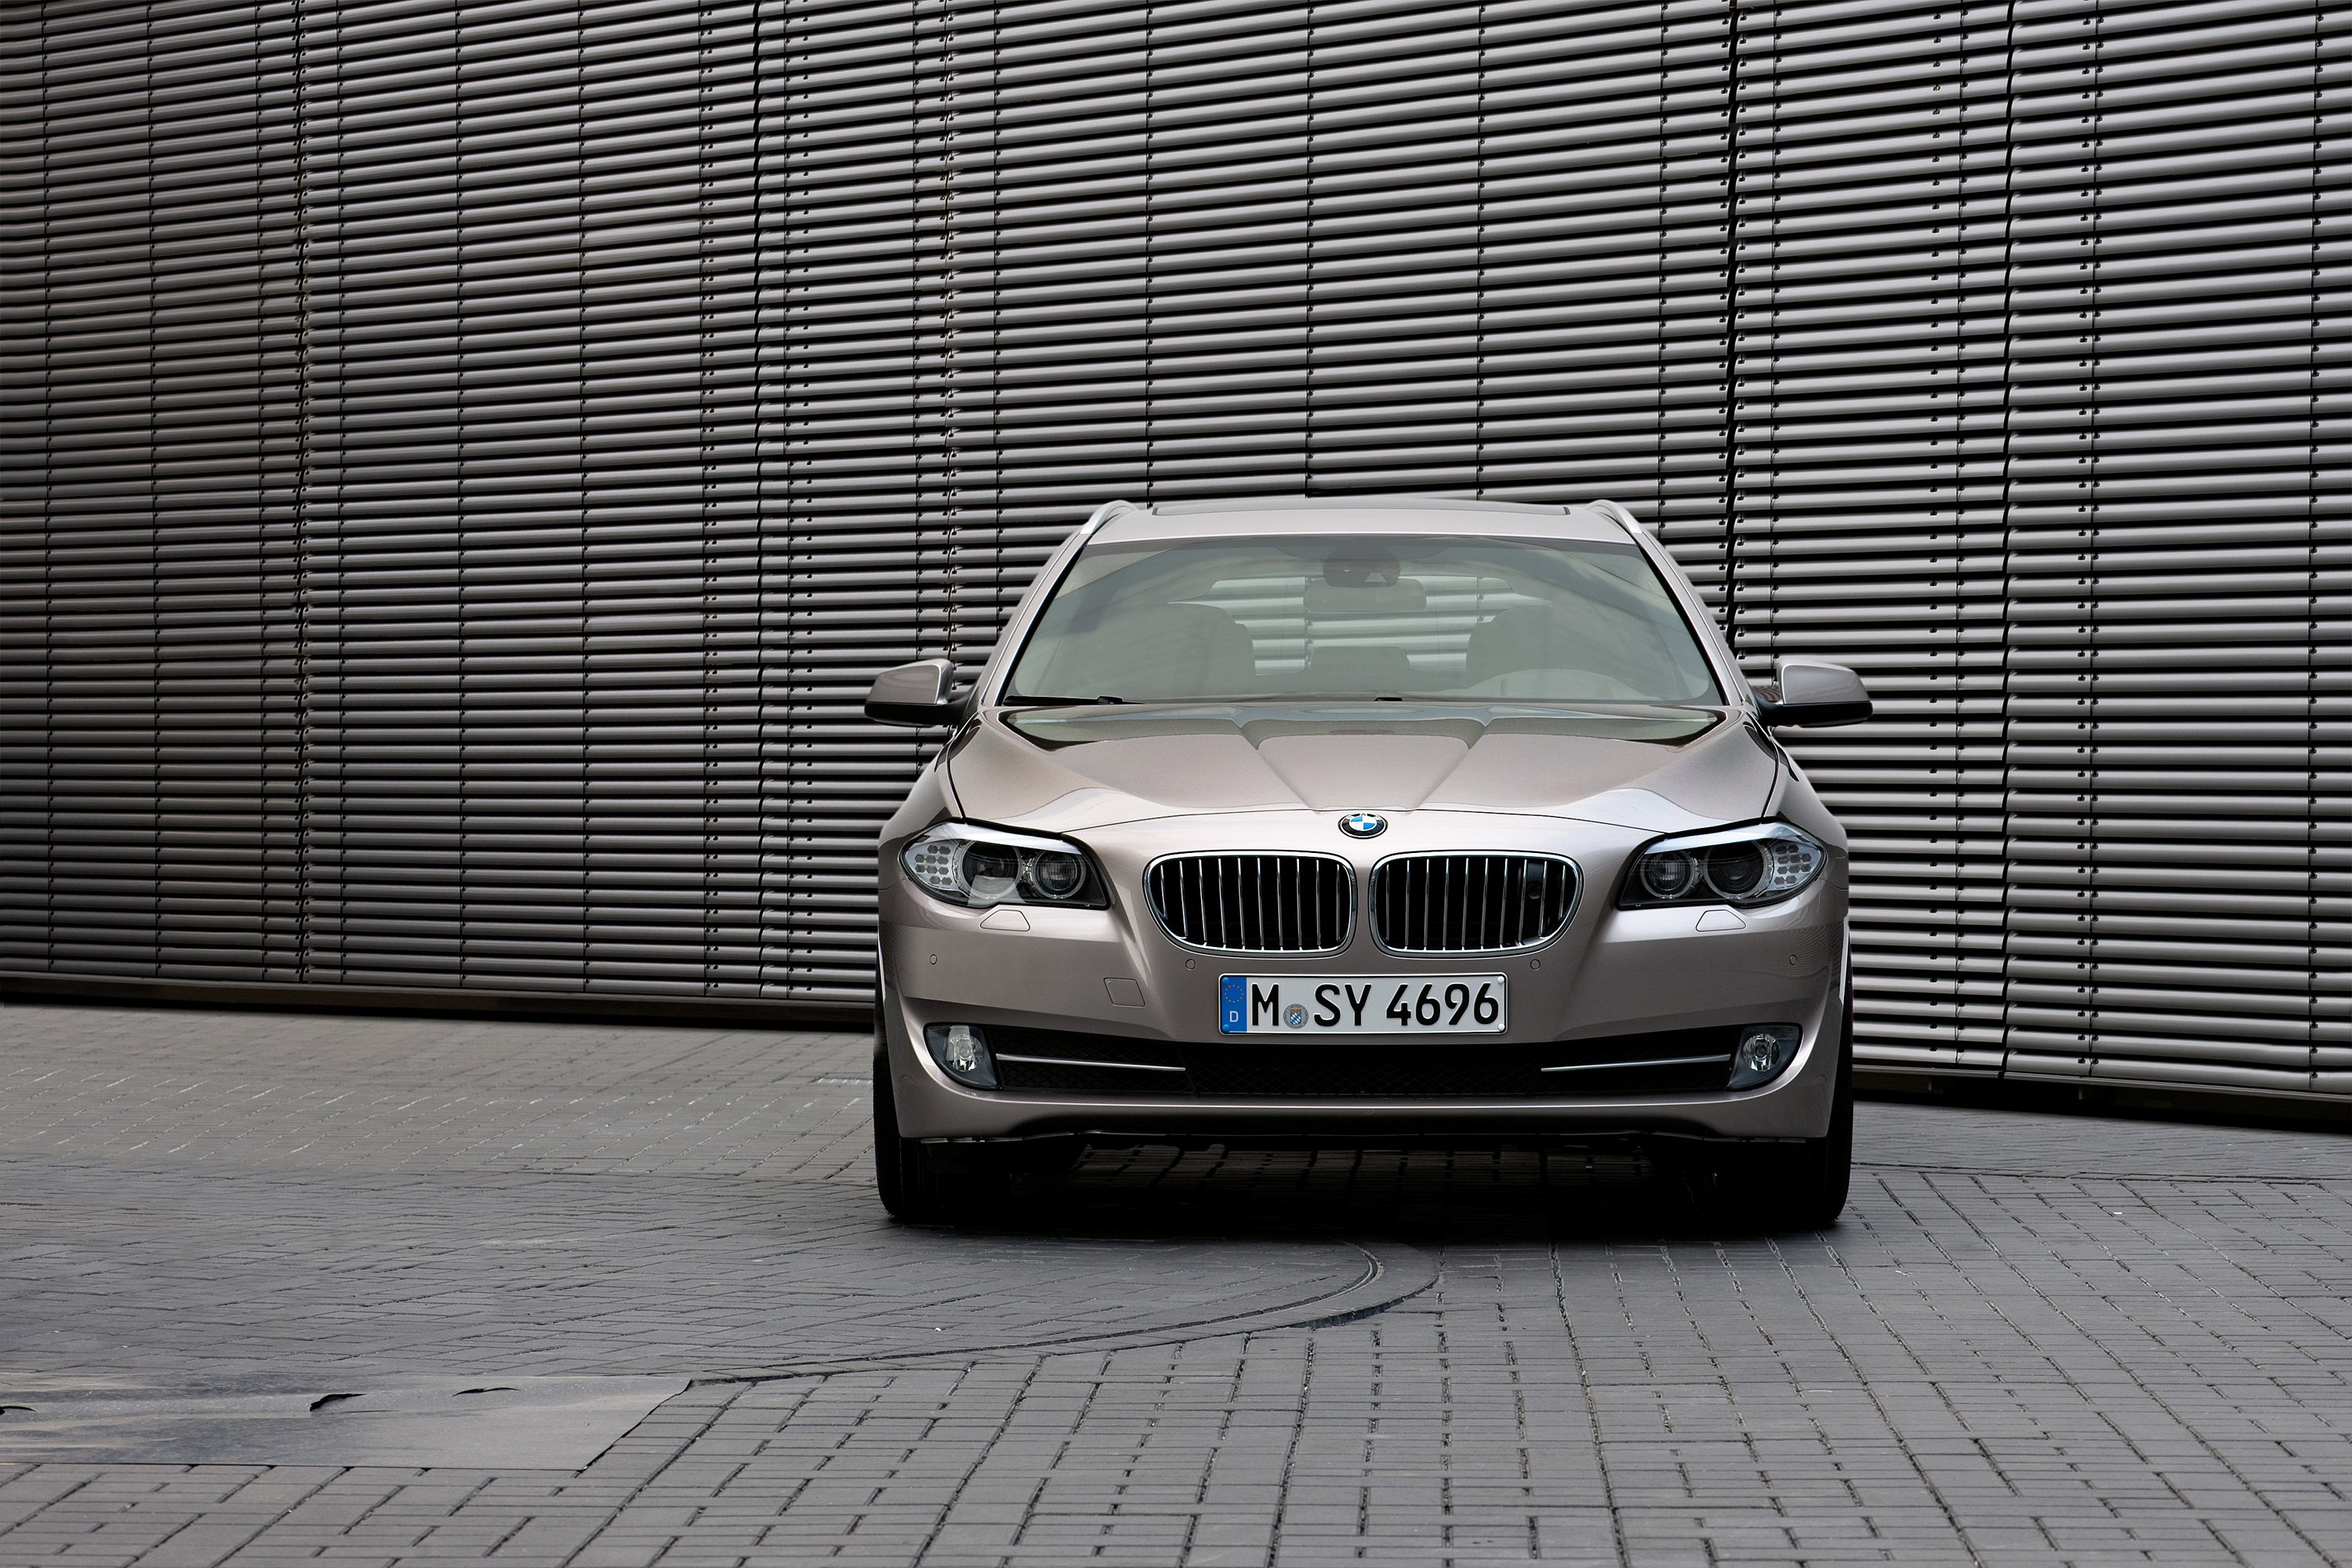 BMW 5 Series F10 Car is Parked Near Office Building Editorial Stock Photo -  Image of cameran, street: 175046788